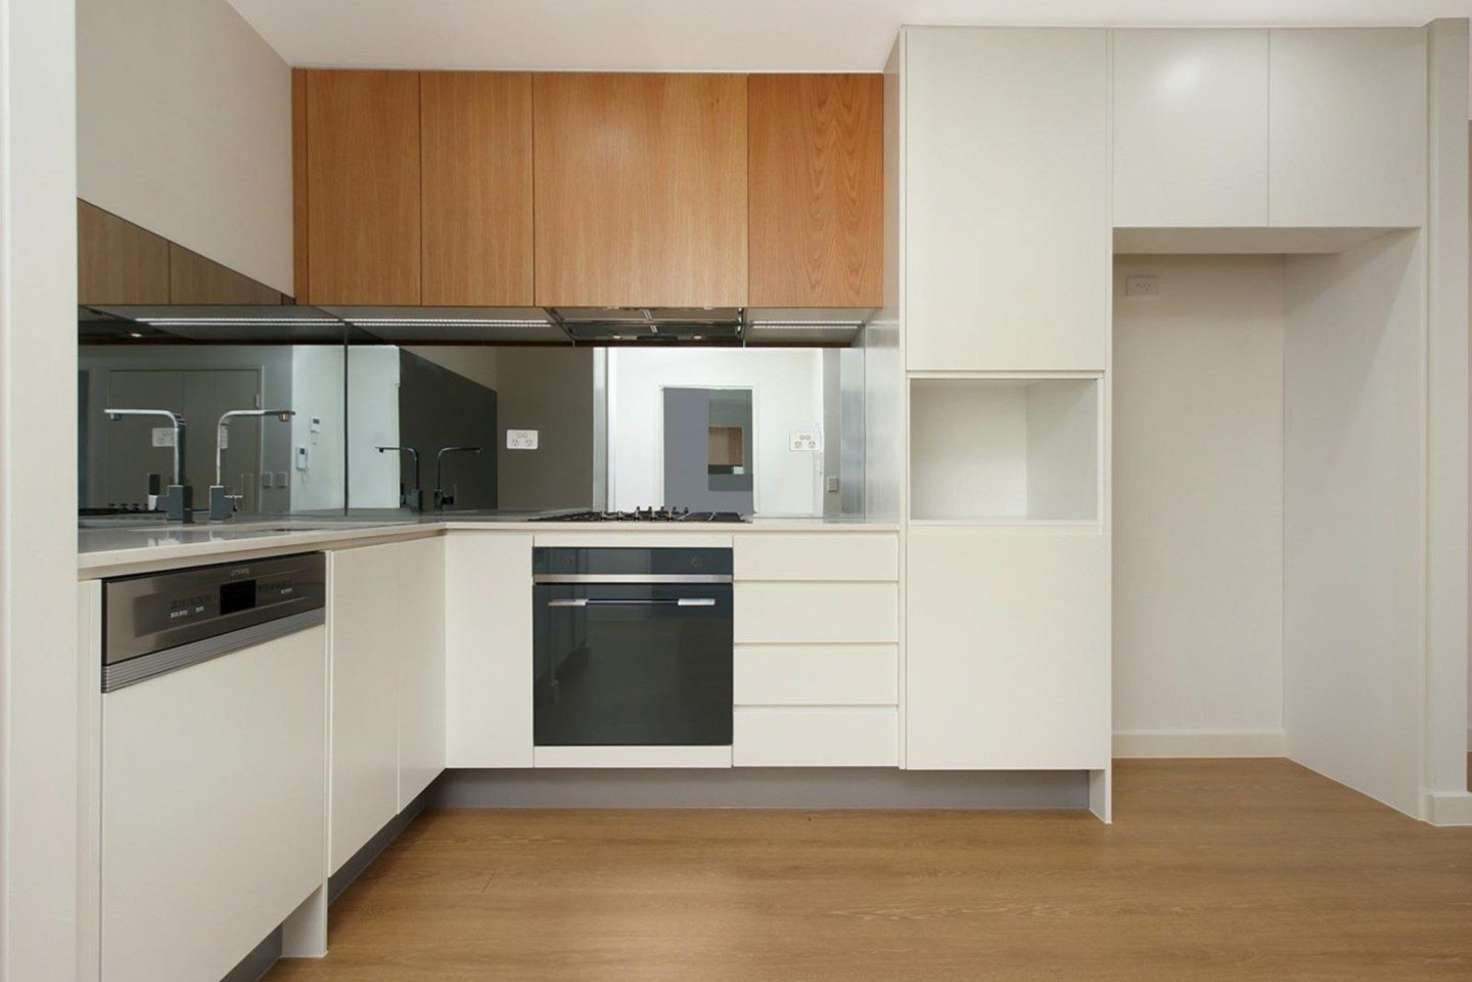 Main view of Homely apartment listing, 12/7 Chapman Avenue, Beecroft NSW 2119